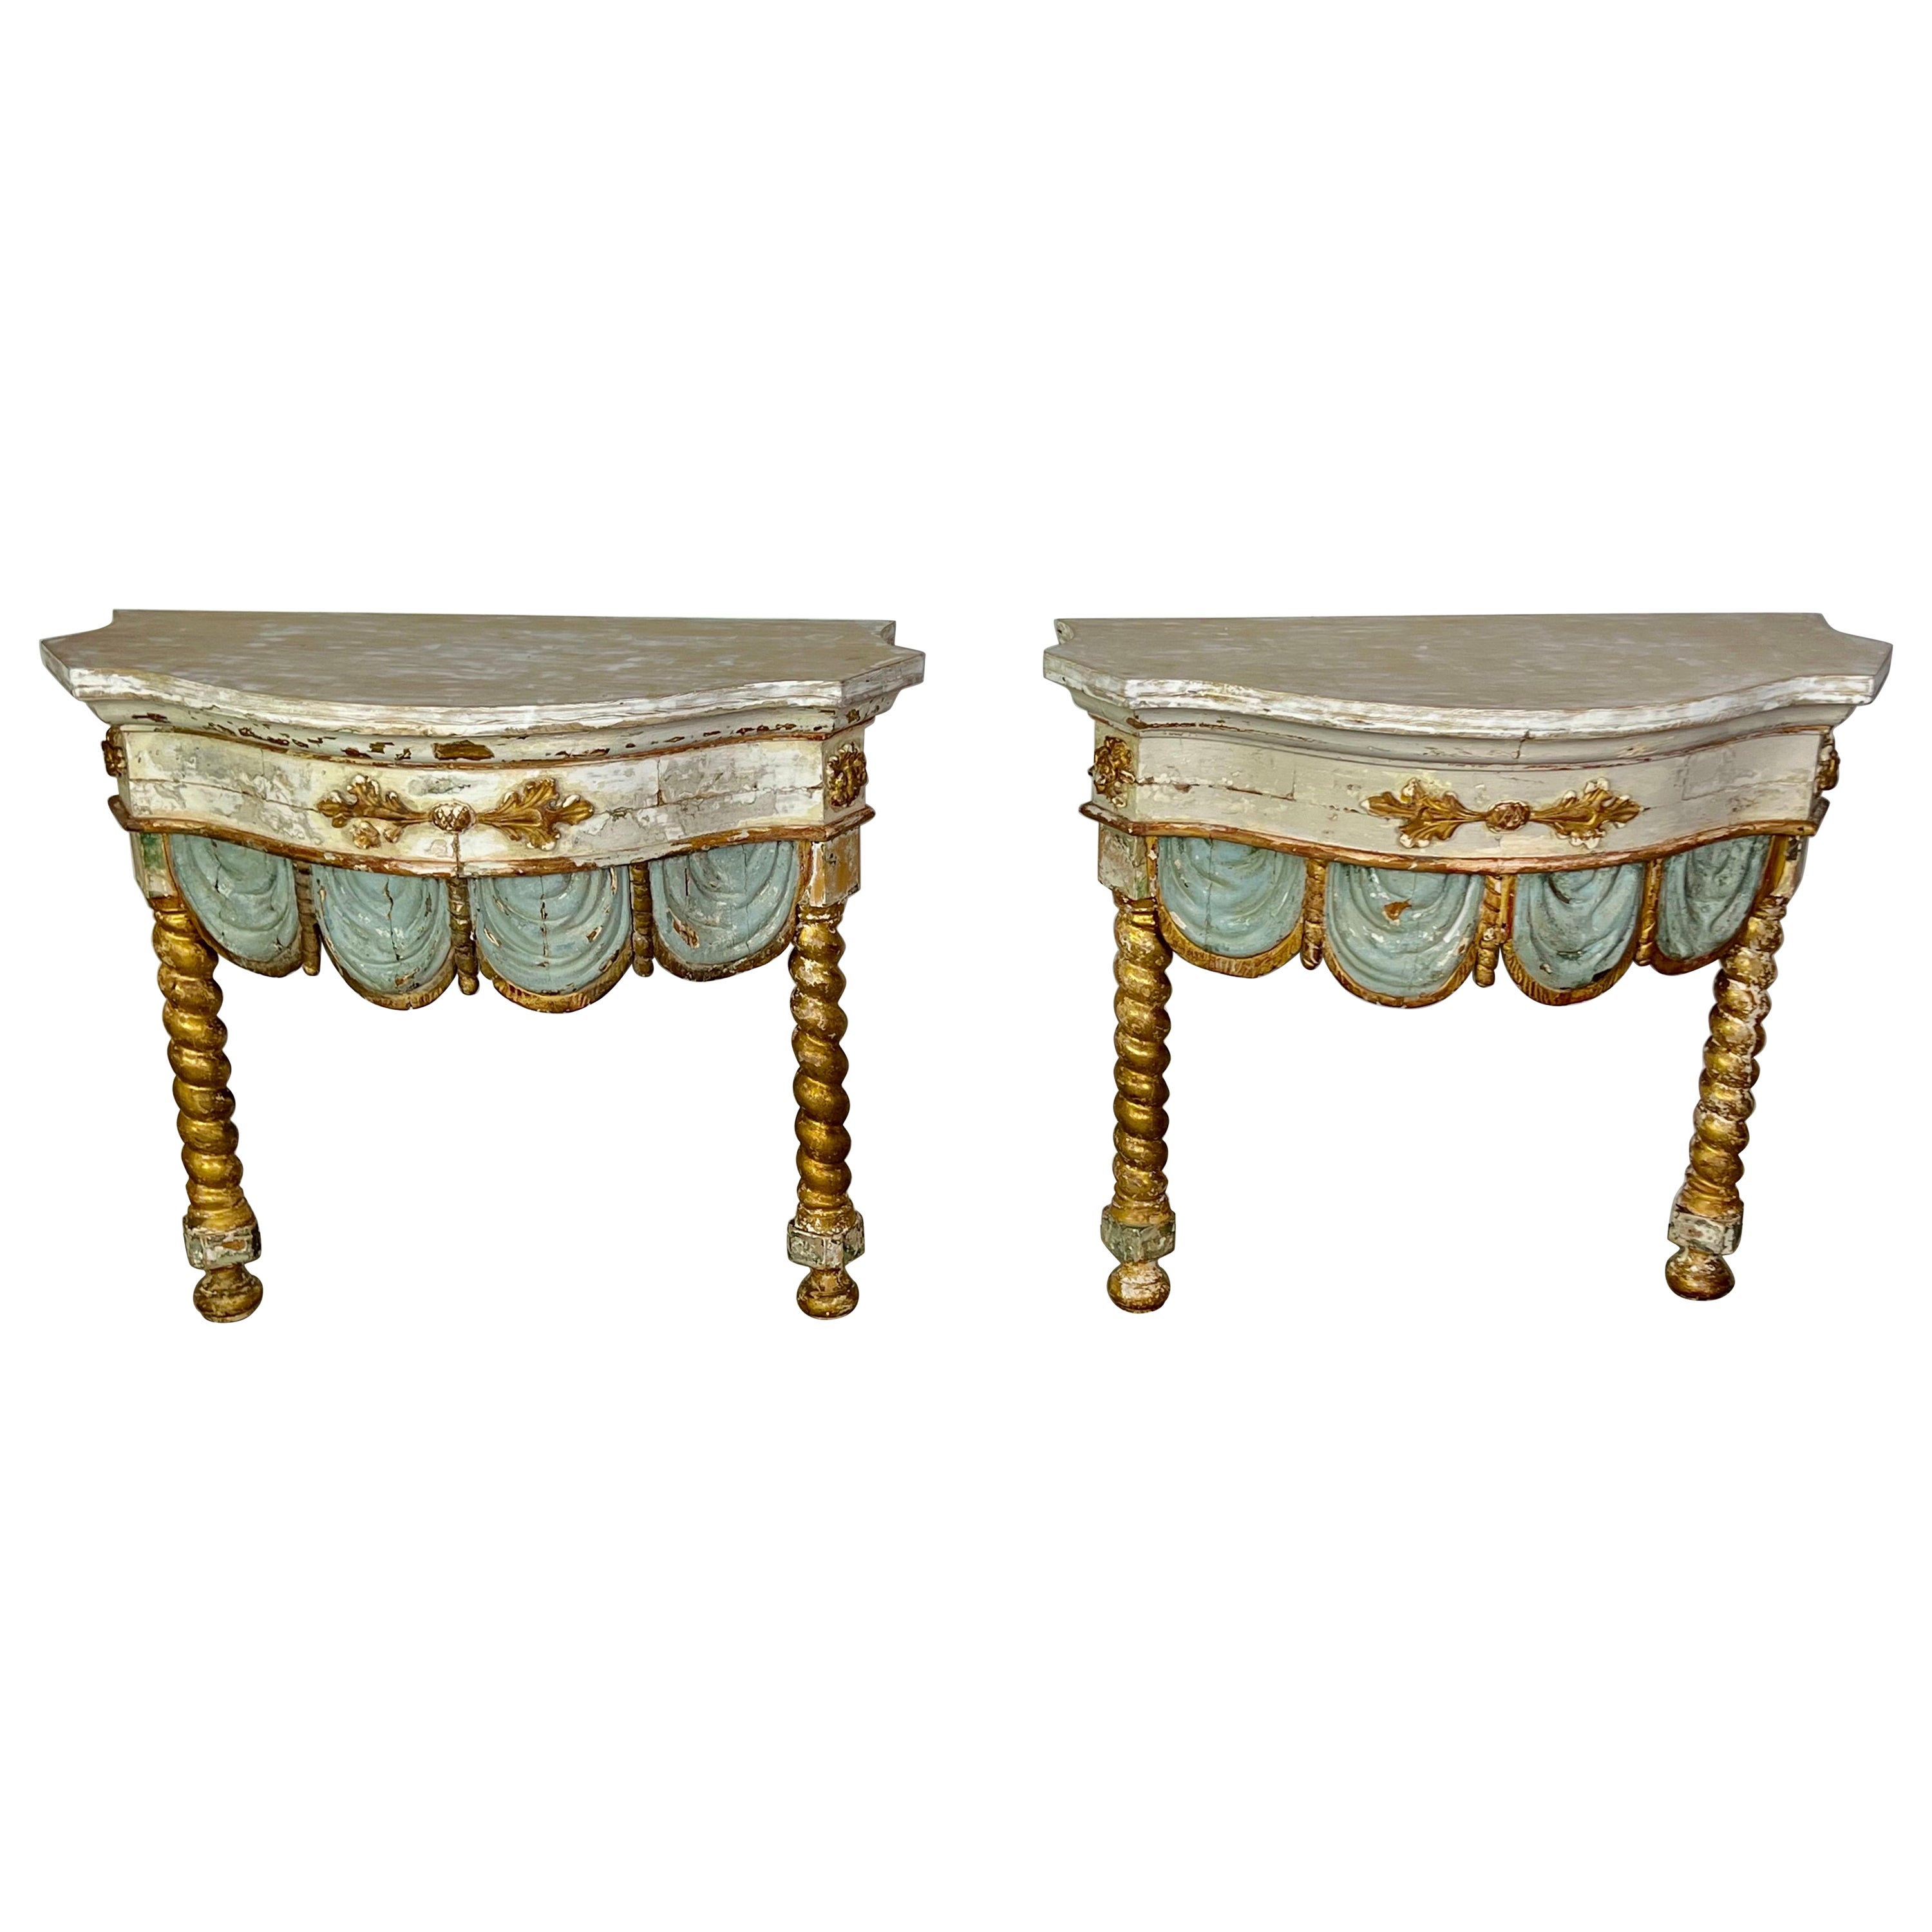 Pair of 19th century Italian Painted and Parcel Gilt Consoles For Sale